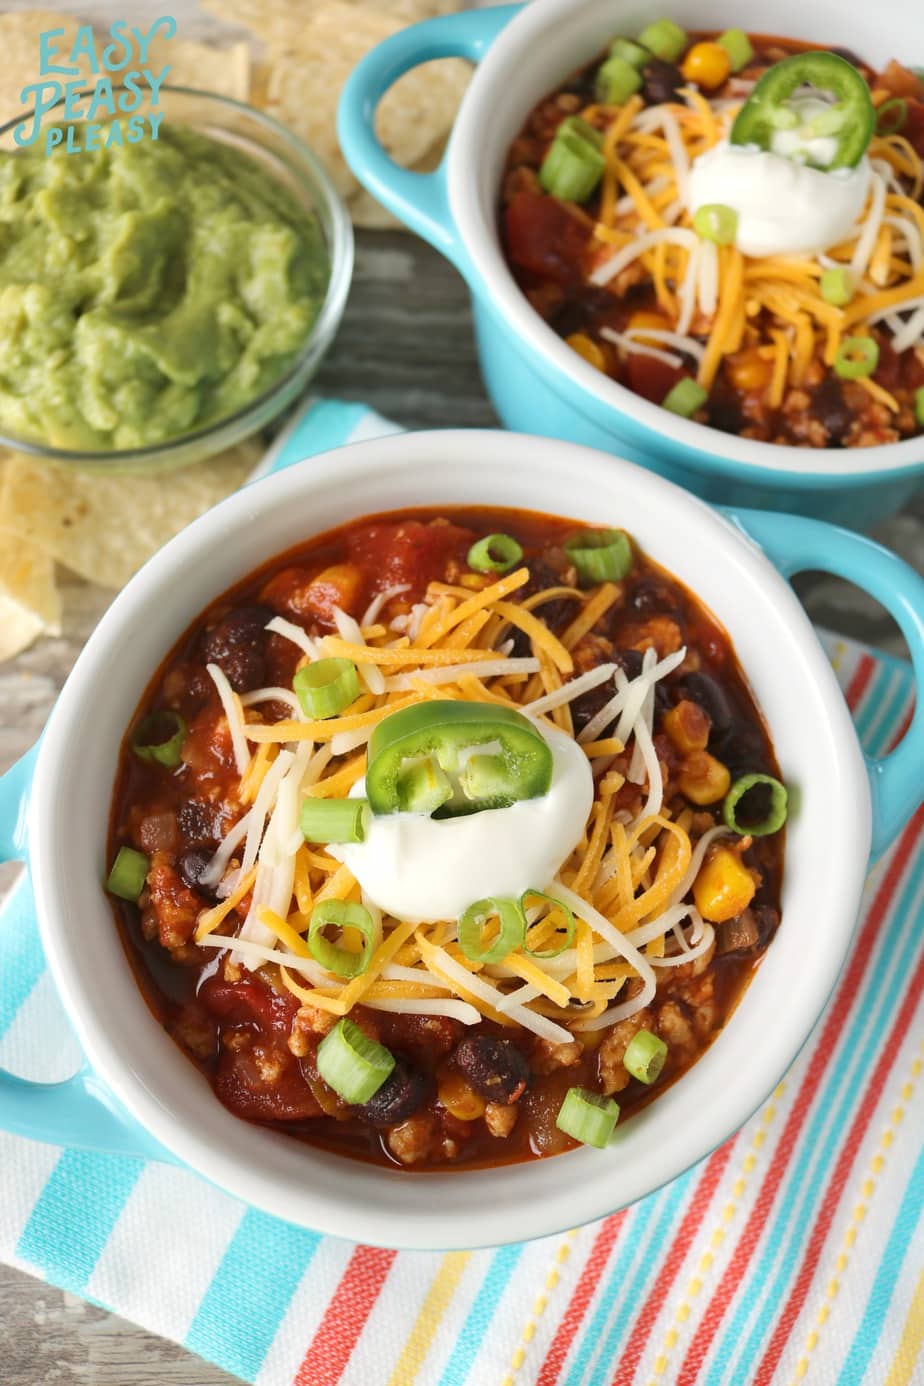 Weeknights just got easier and tastier with this Chicken Chili Recipe.